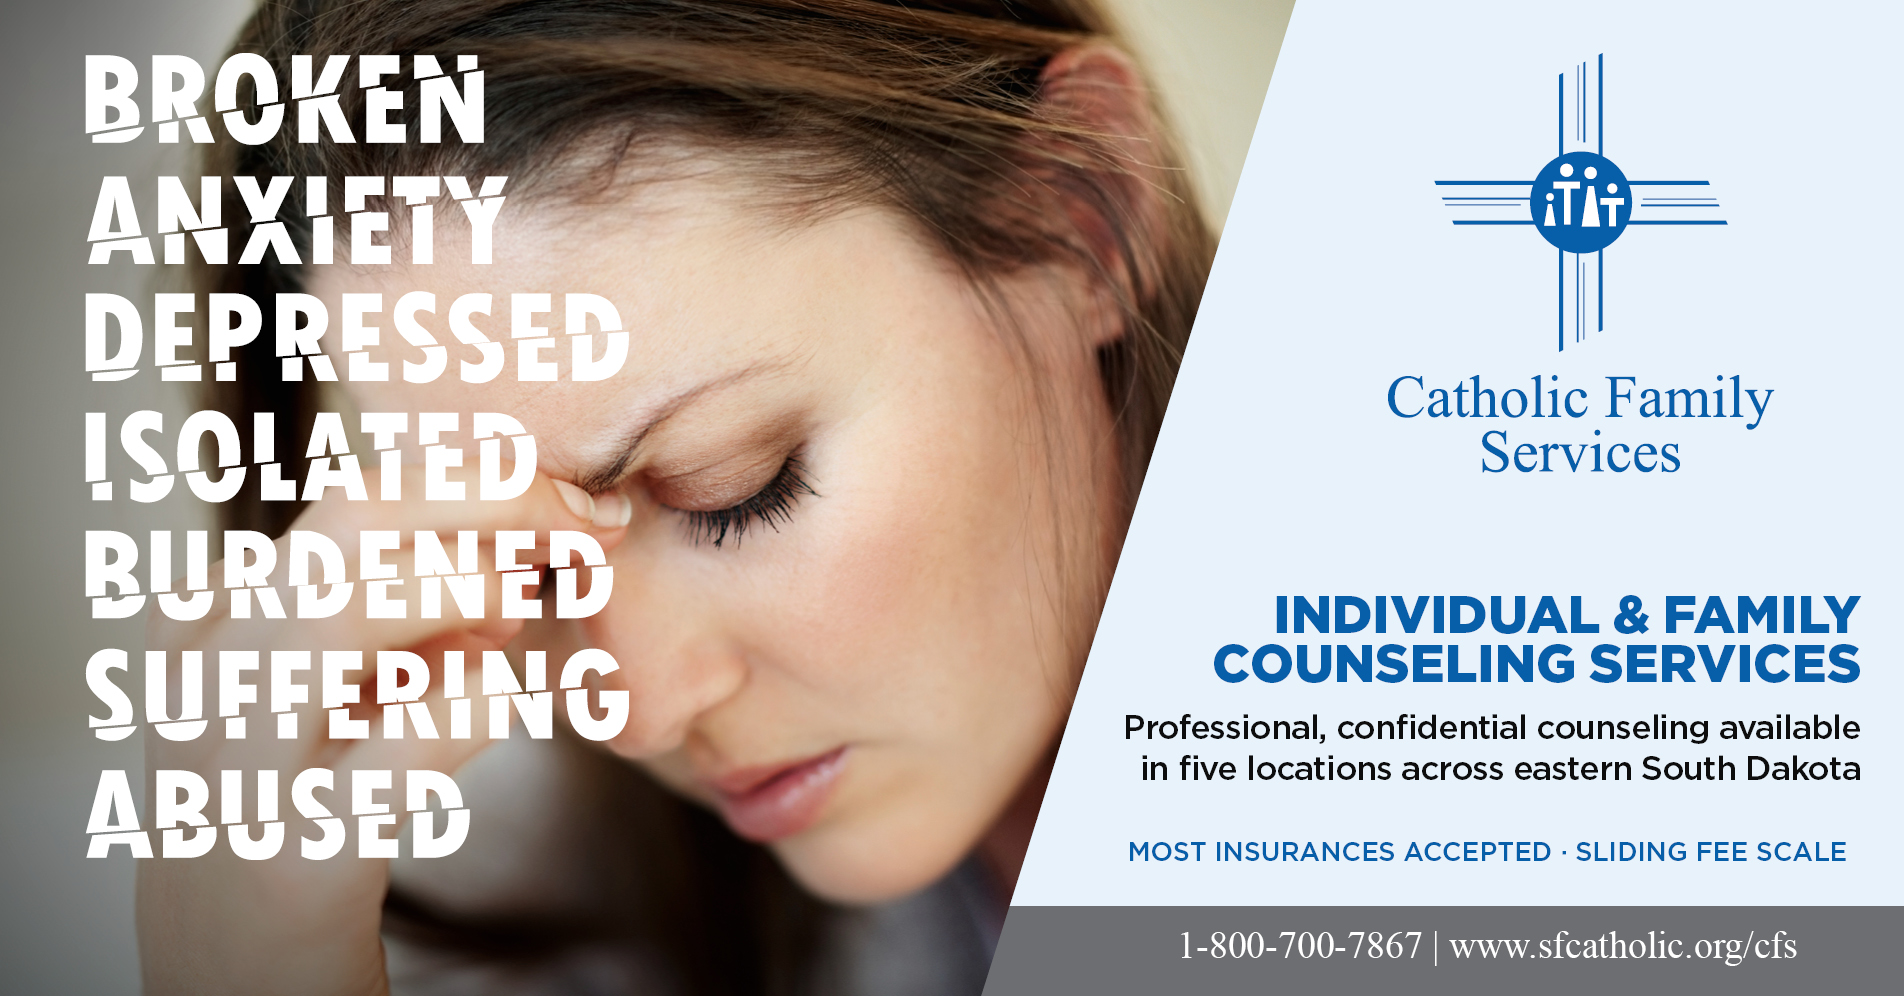 Catholic Family Services Counseling Services